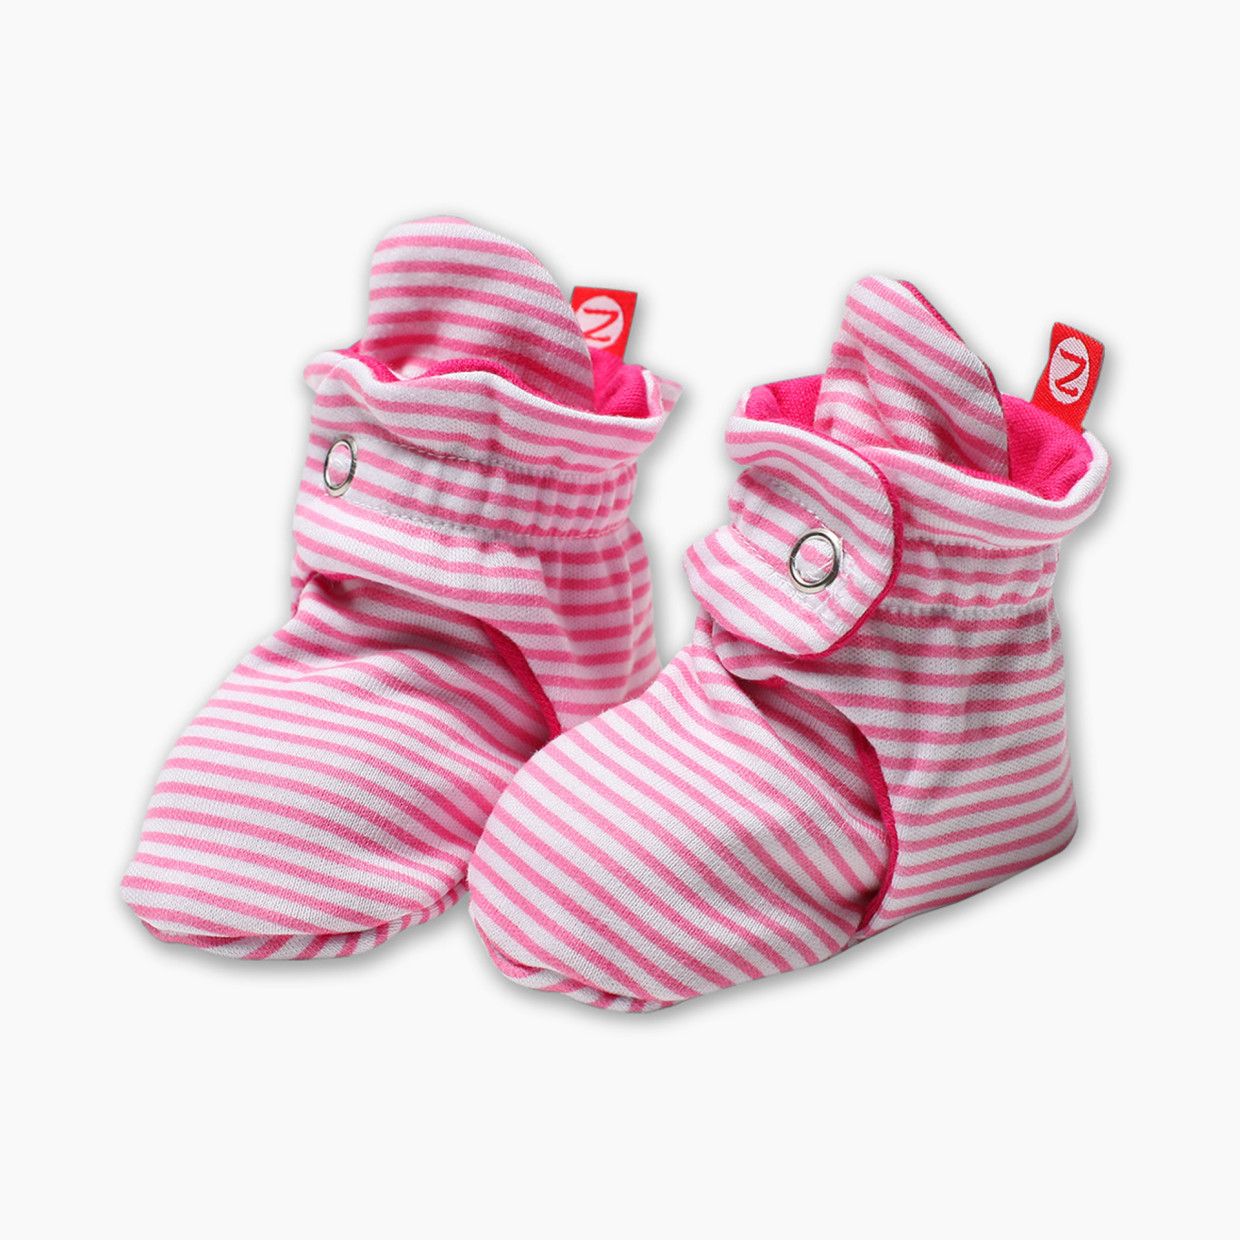 Zutano Candy Stripe Cotton Baby Booties - Hot Pink, 0-3 Months.